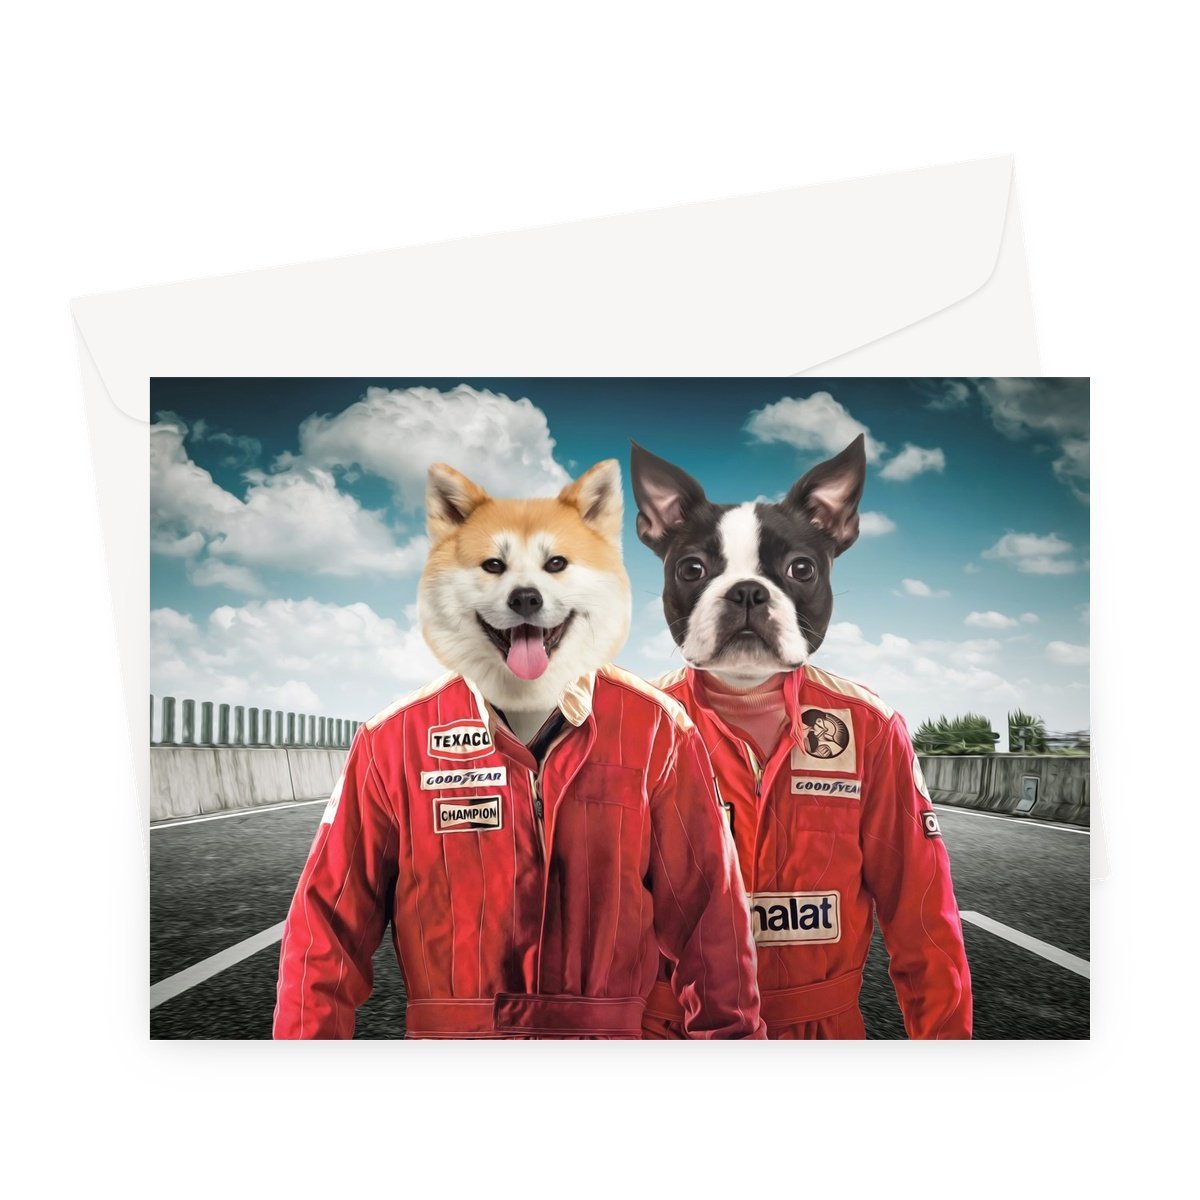 The Race Car Drivers: Custom Pet Greeting Card - Paw & Glory - #pet portraits# - #dog portraits# - #pet portraits uk#paintings of pets, dog caricatures, pets portrait, pet portraits paintings Pet portraits, Pet portraits uk, Crown and paw